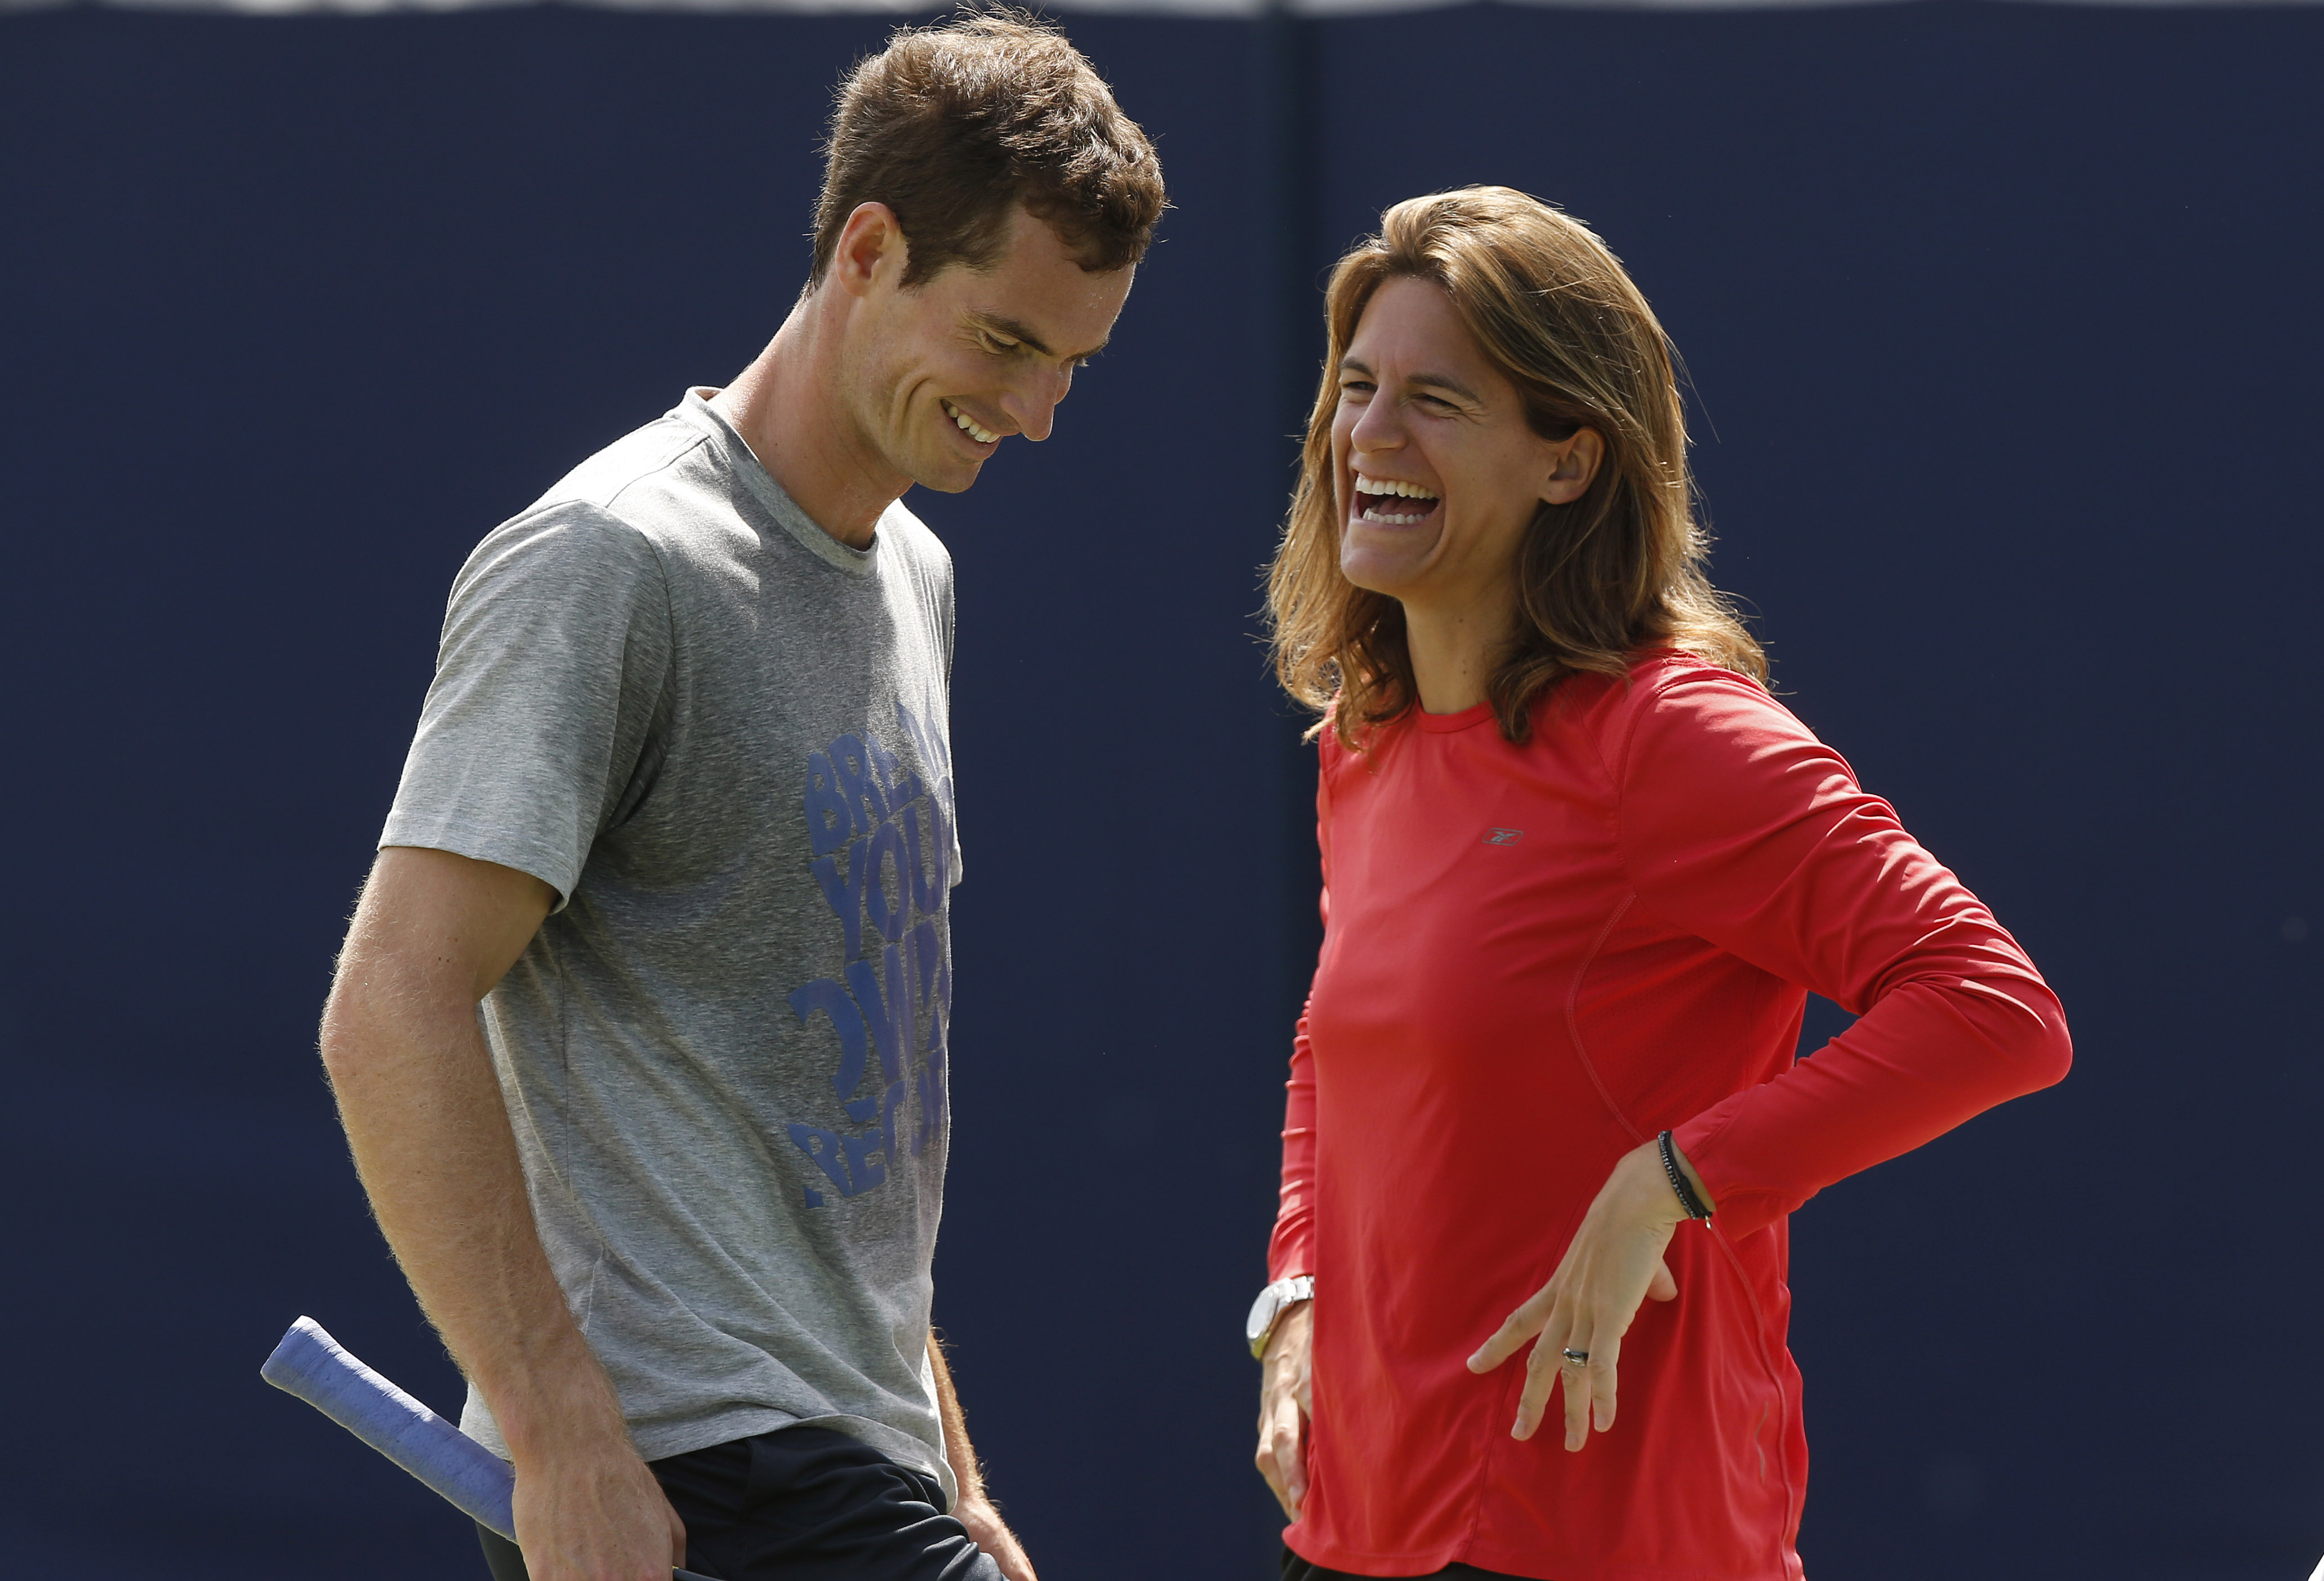 Andy Murray of Britain shares a laugh with his new coach Amelie Mauresmo during a training session before his Queen's Club grass court championships tennis match in London on June 12, 2014. (Sang Tan—AP)